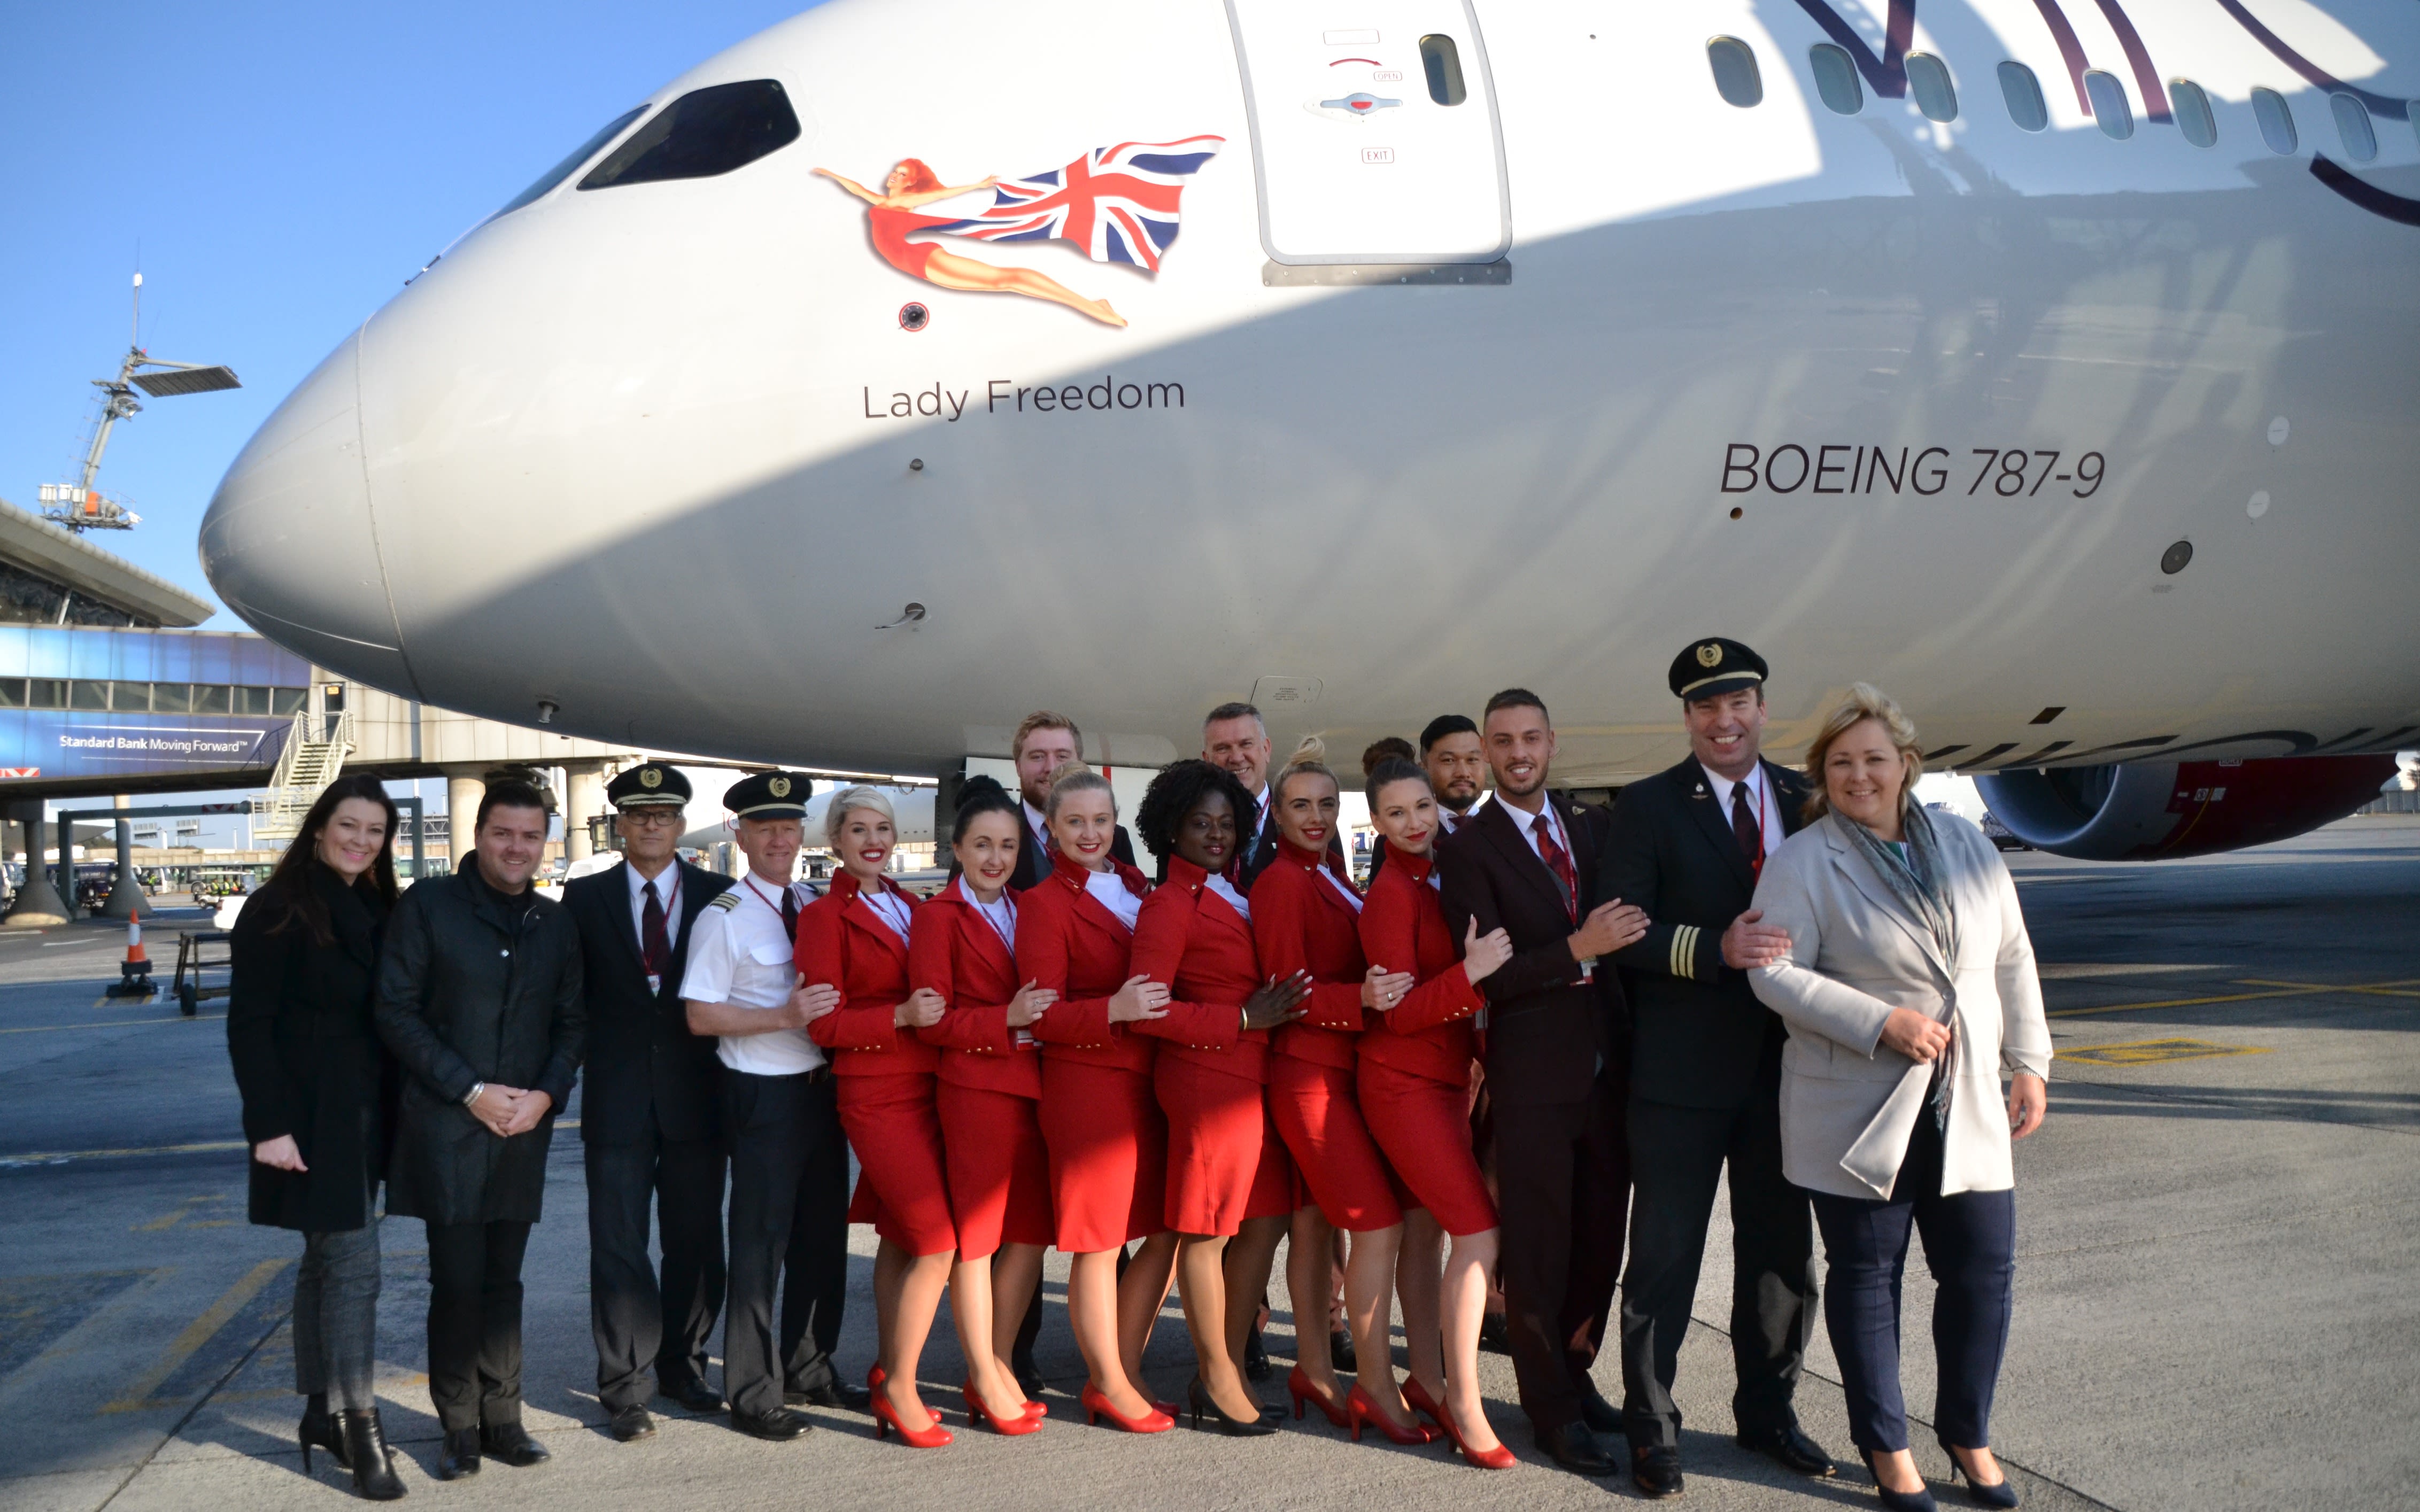 Cabin crew standing in front of a Virgin Atlantic plane called Lady Freedom